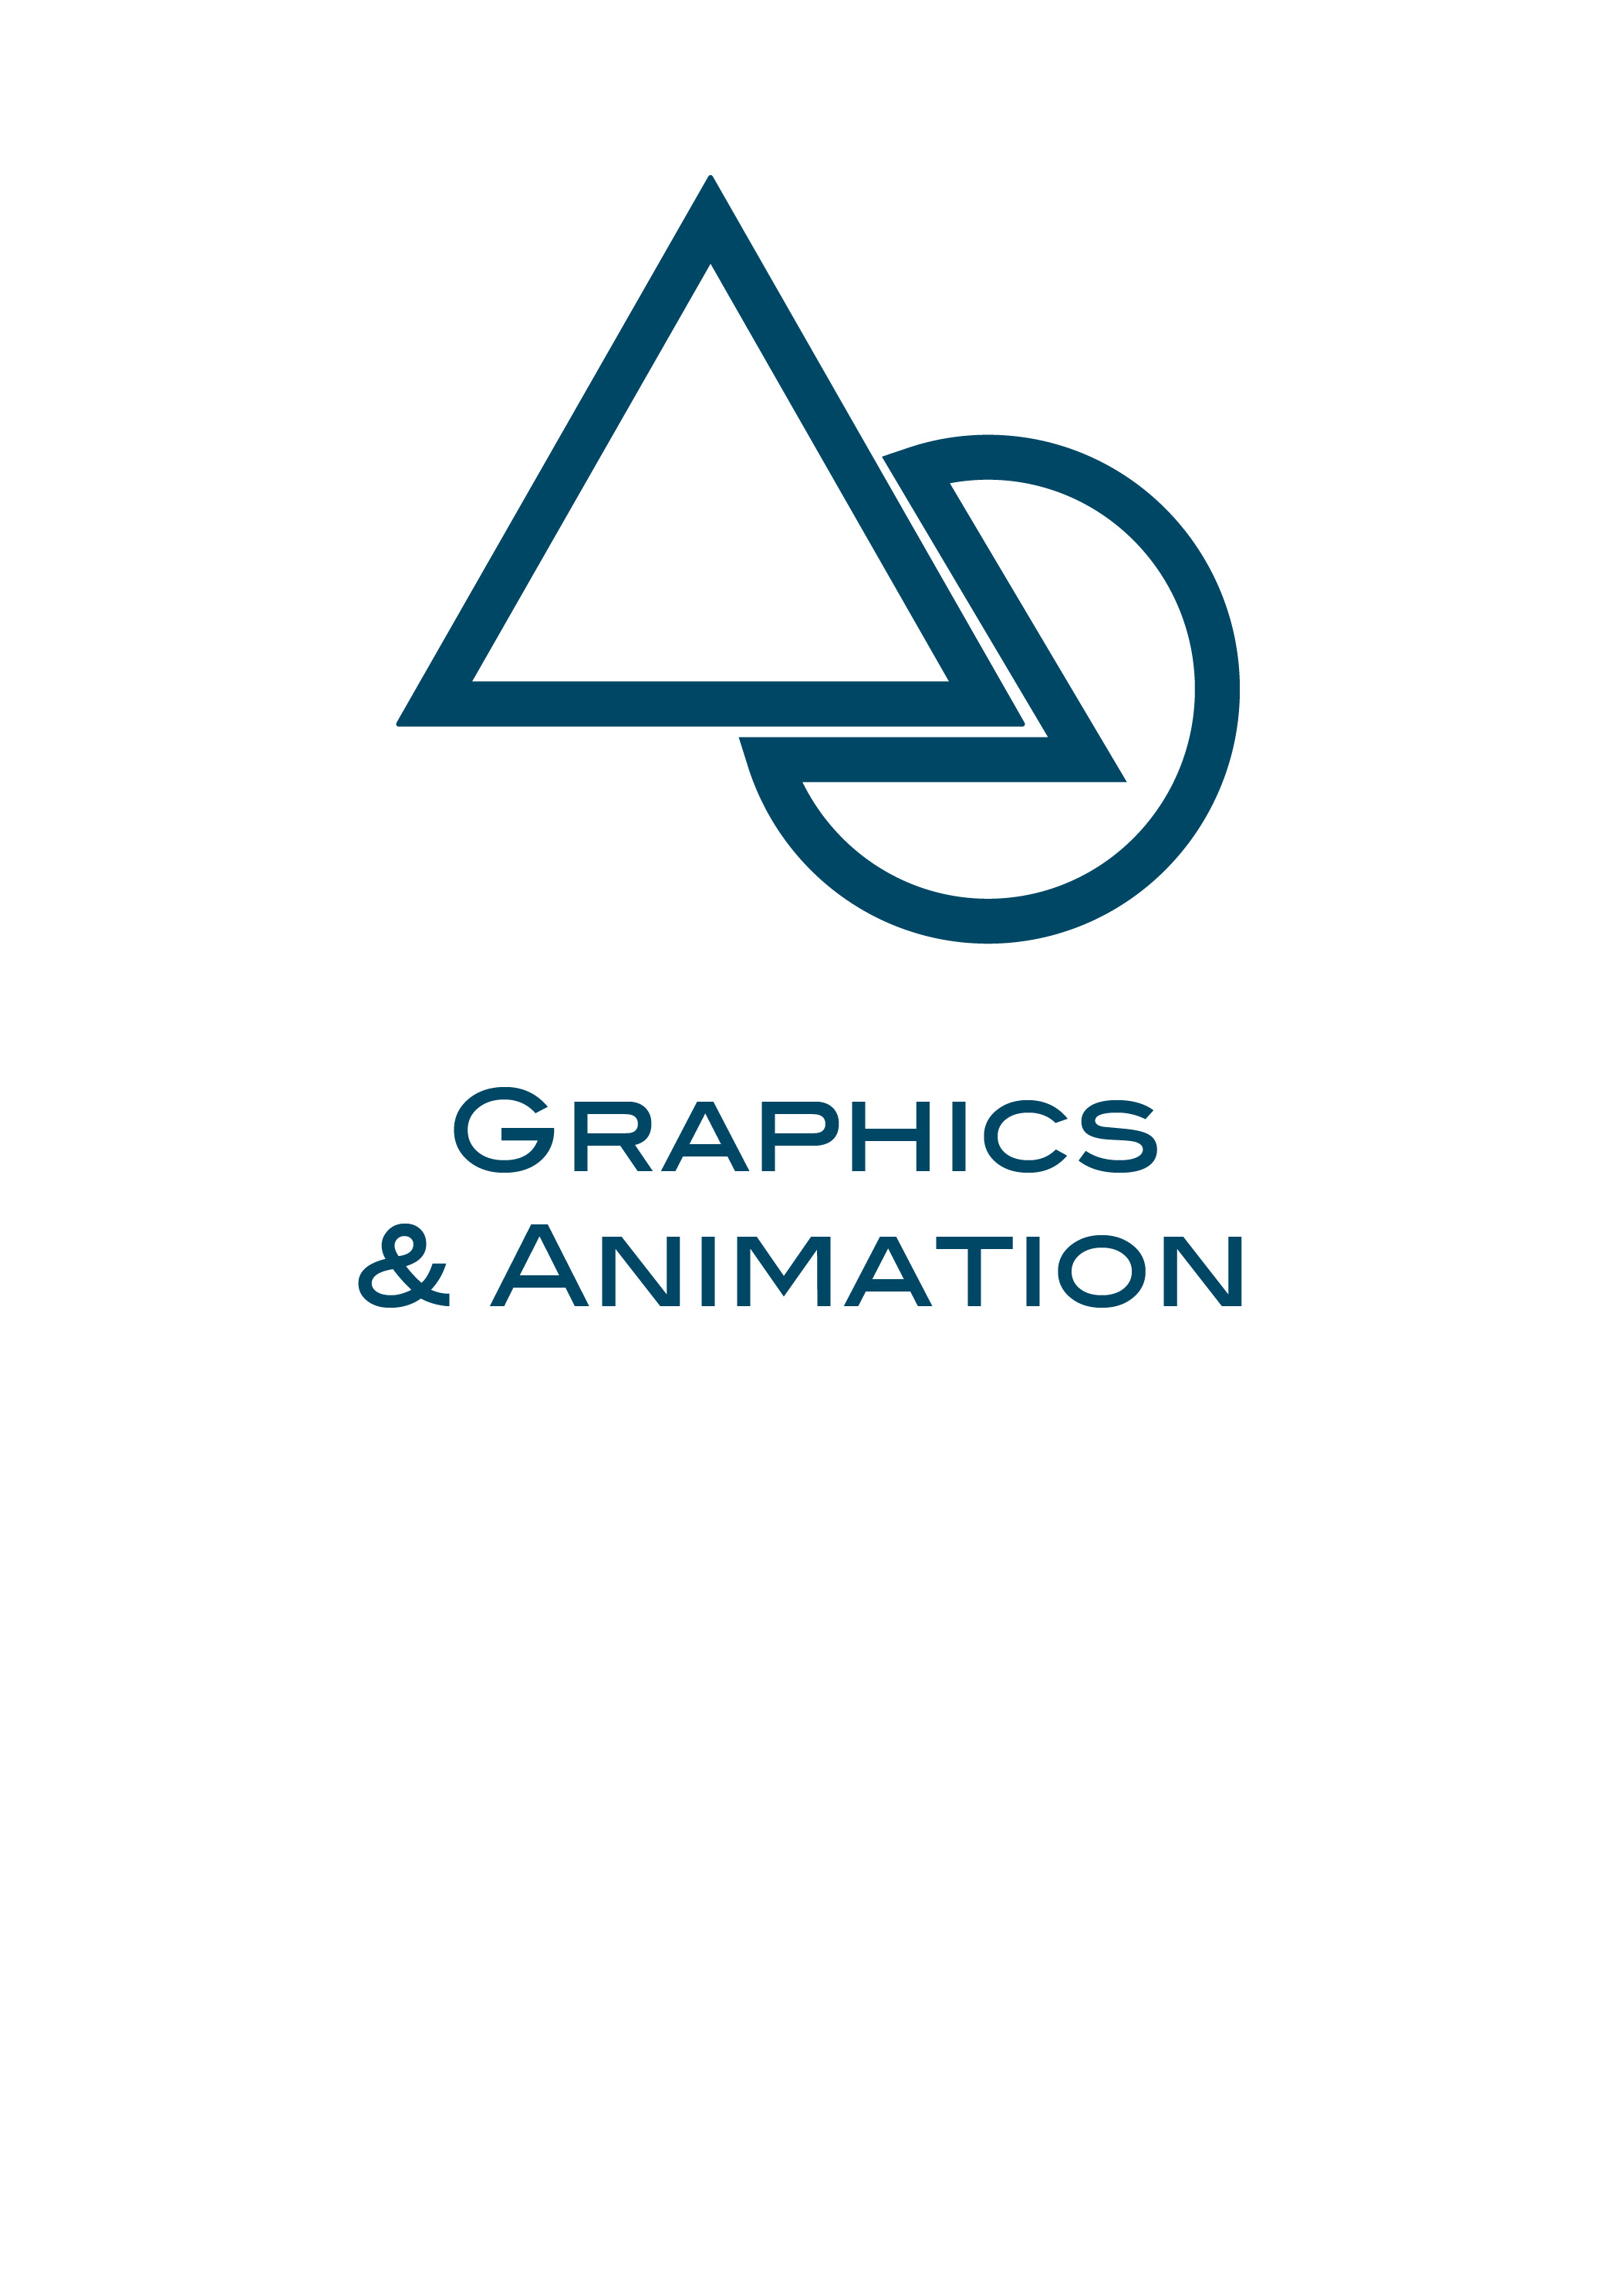 We offer a full range of motion graphics, animation and visual effects services. We produce 2D and 3D animation as well as stunning CGI effects for live action video.